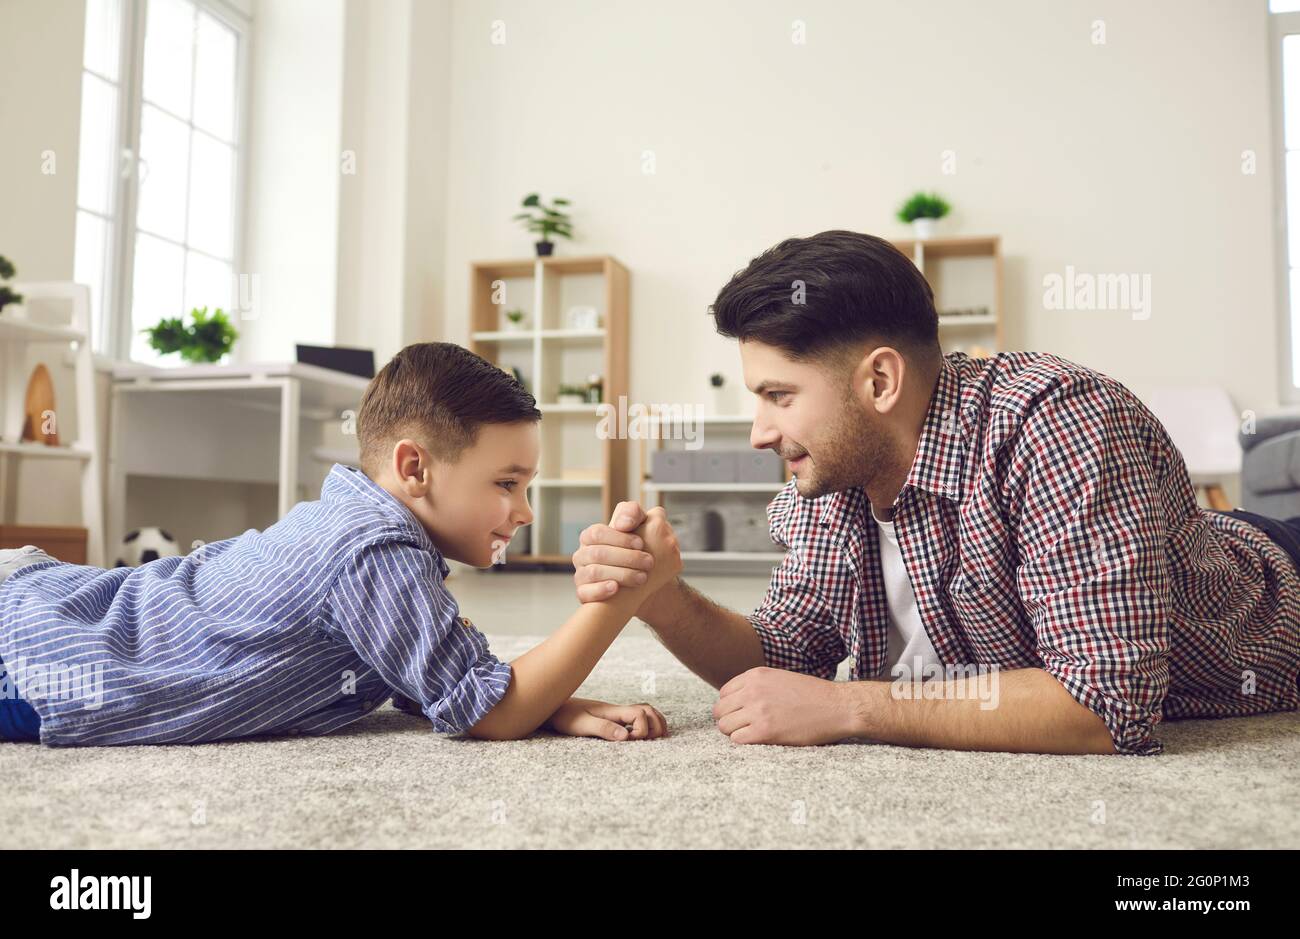 Side view of happy father and son competing in arm wrestling lying on the floor at home. Stock Photo